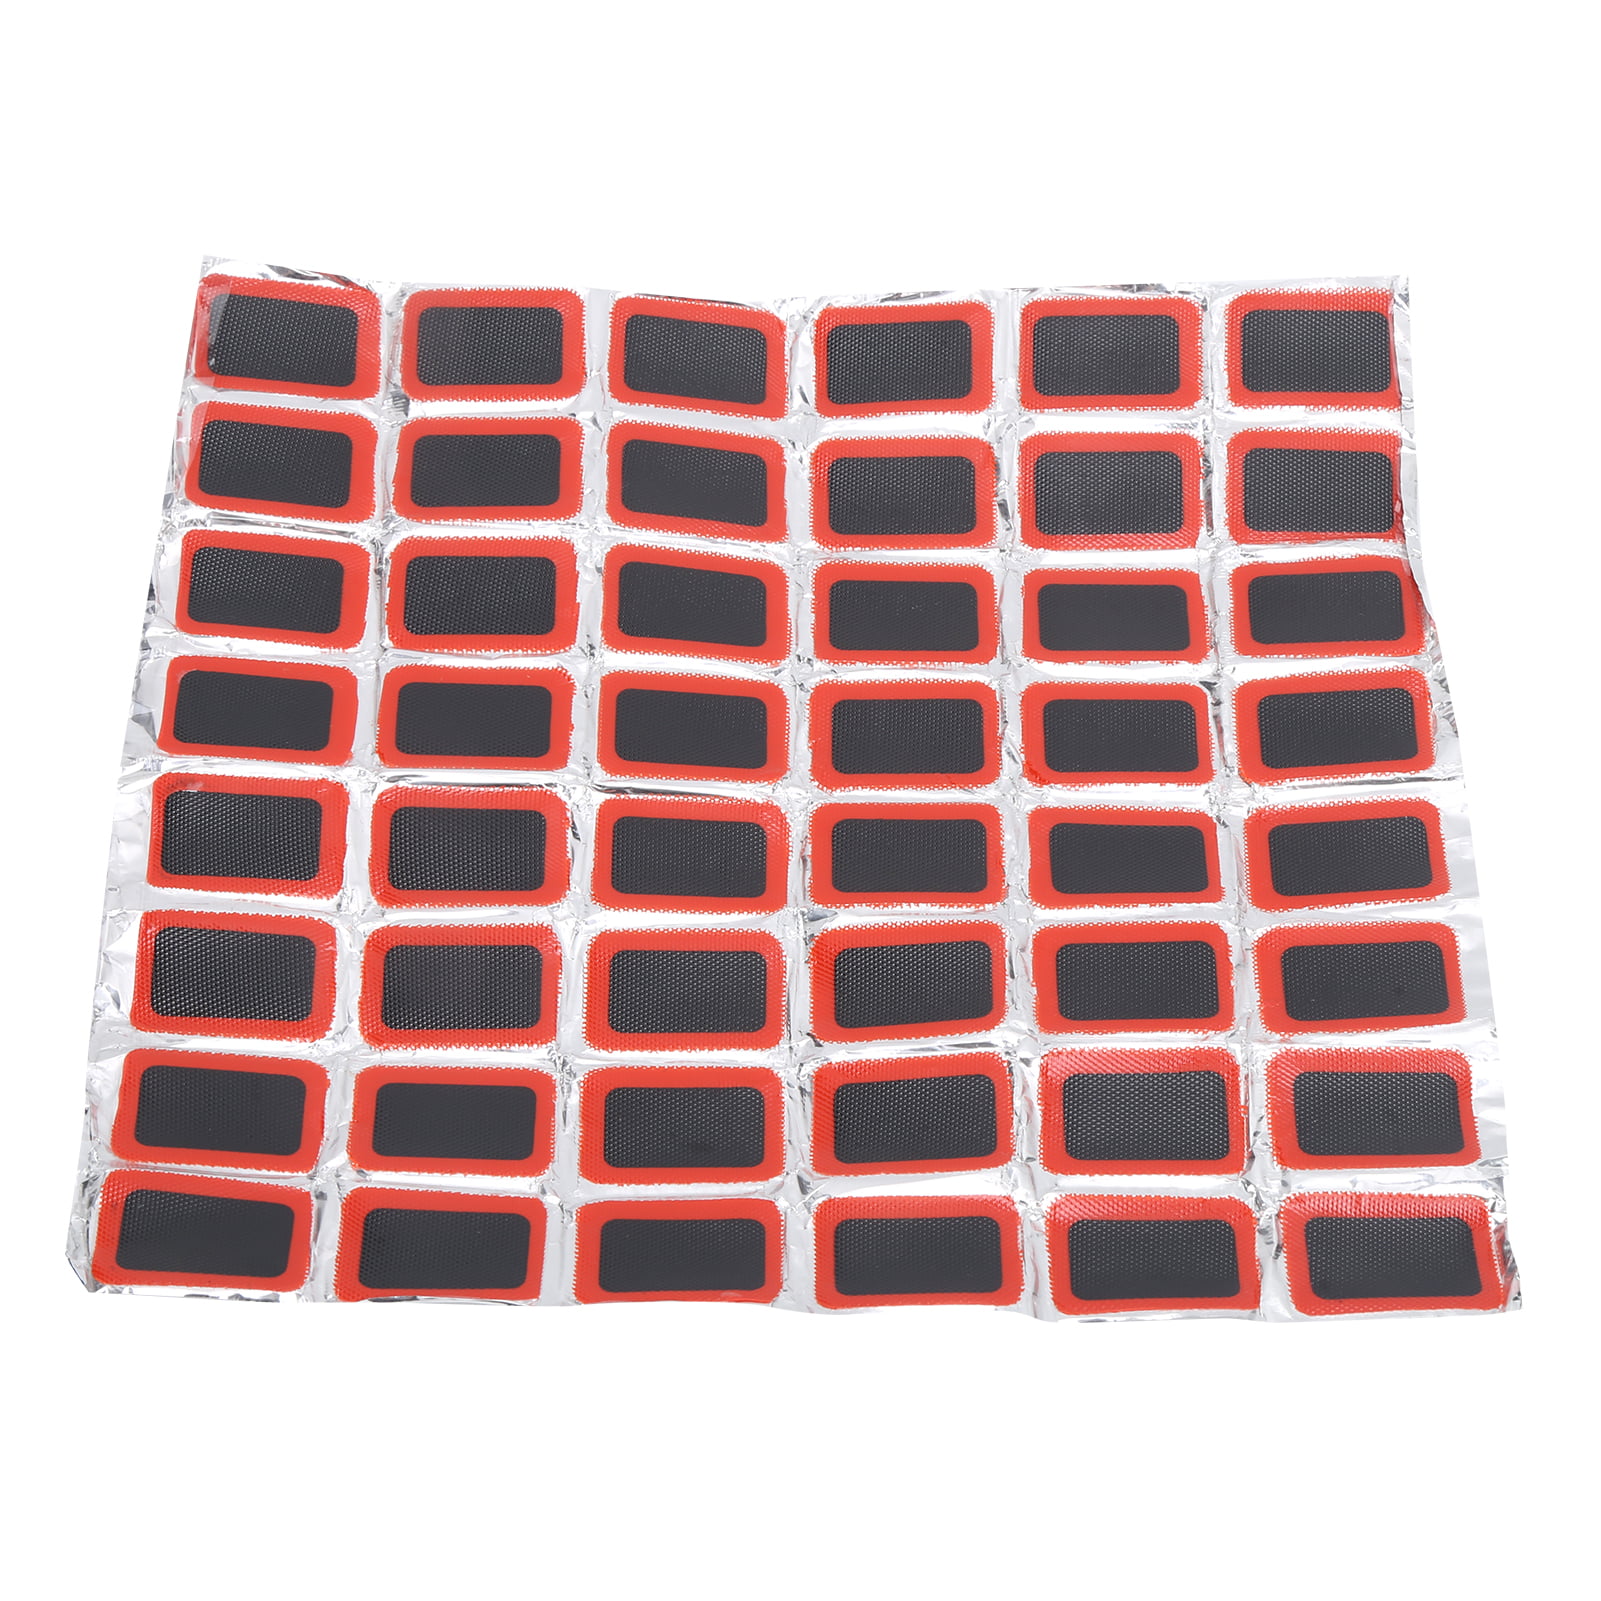 48pcs Rubber puncture patches bicycle bike tire tyre tube repair cycle patch kit 